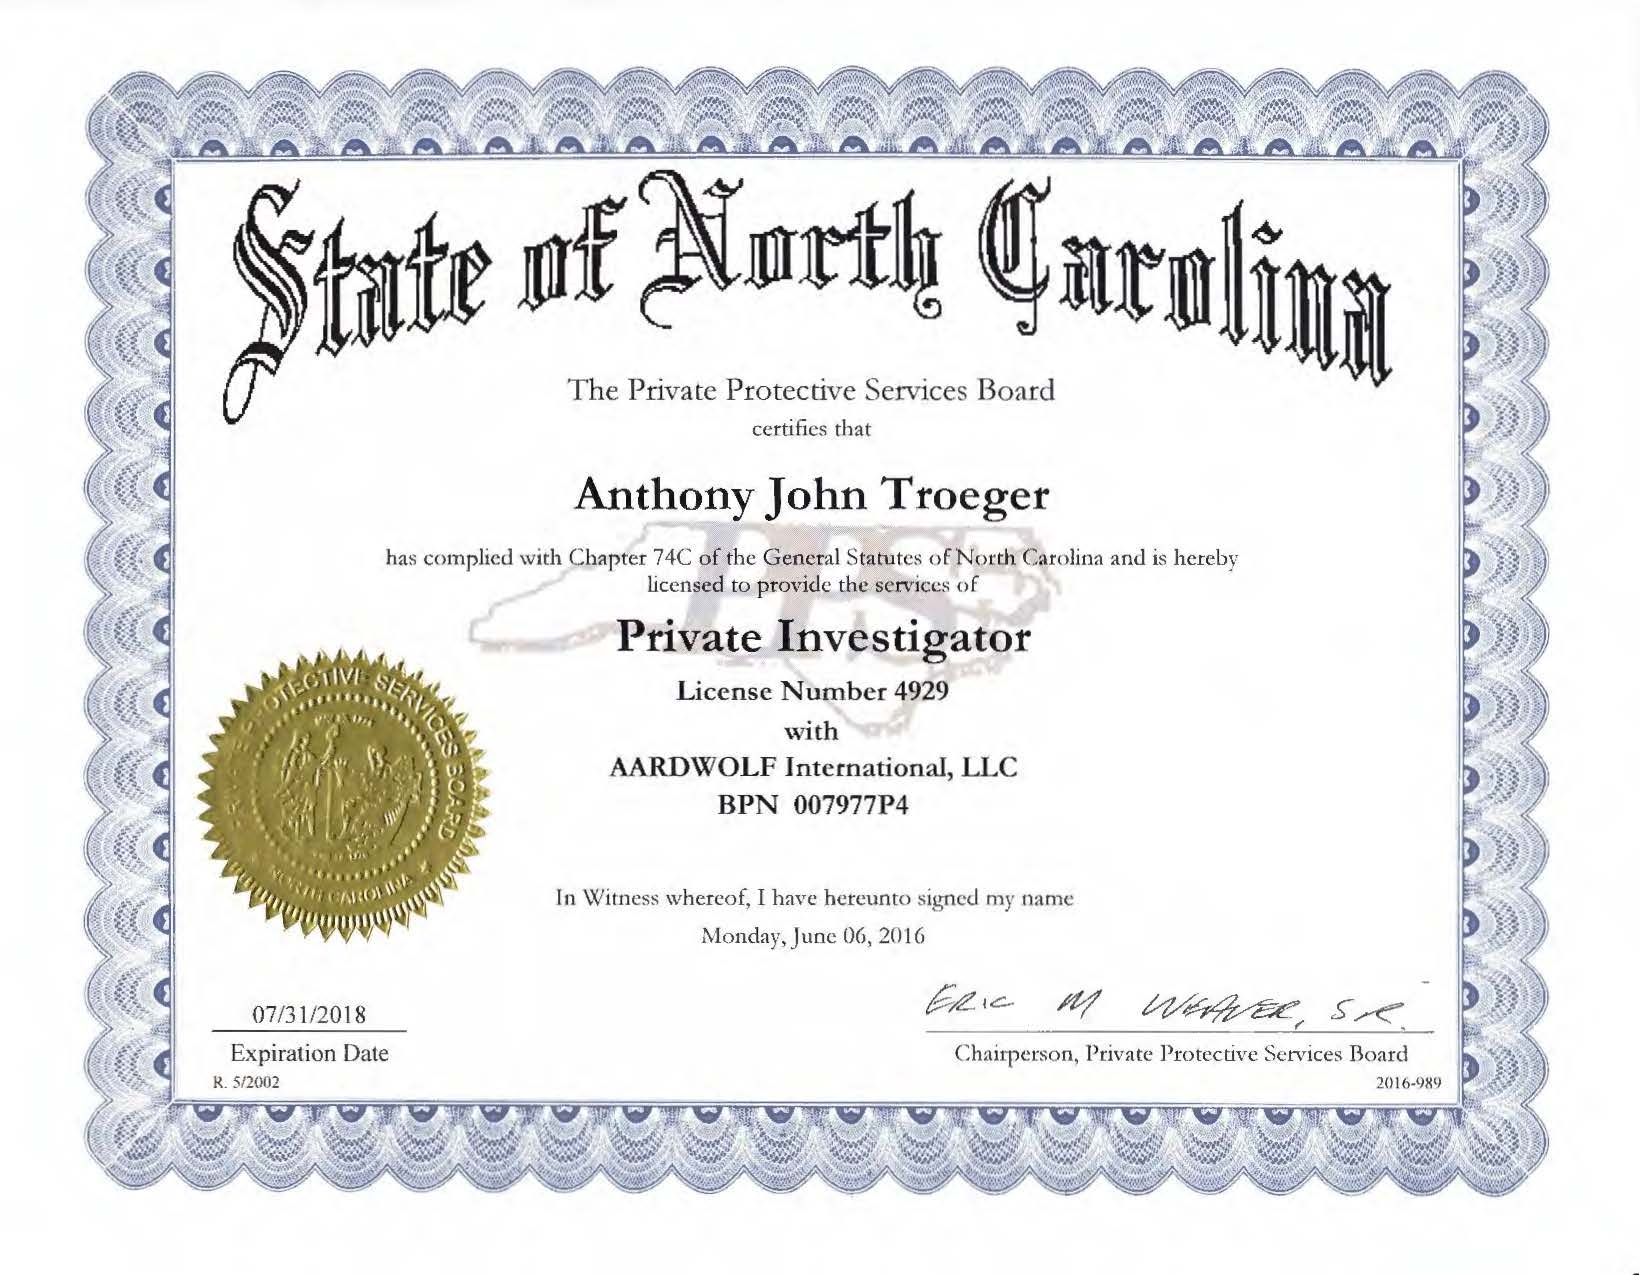 Our NC license.